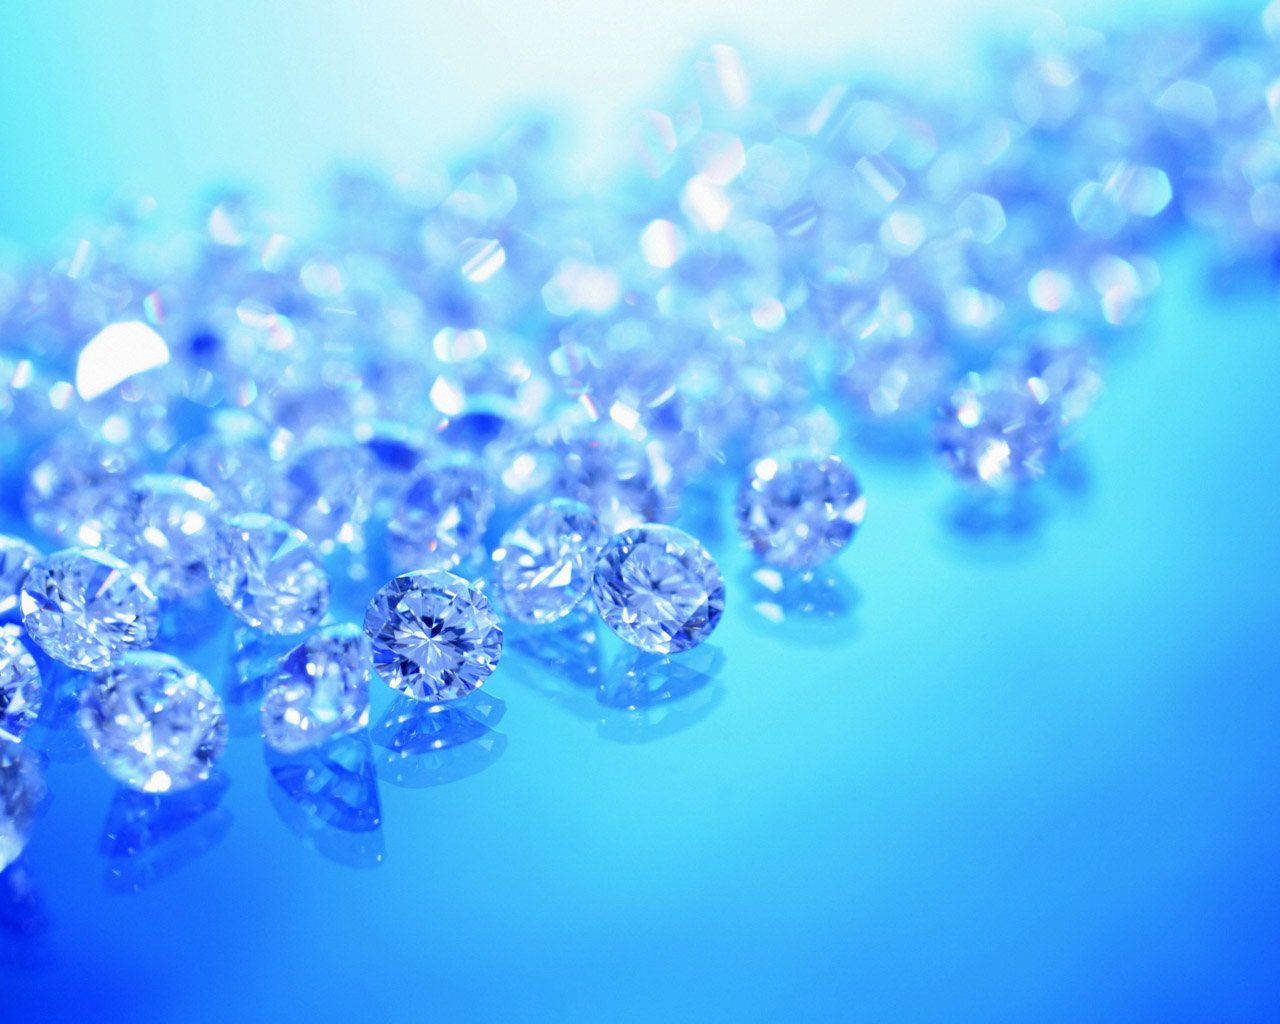 Larger-than-life Blue Diamond Crystals Sparkle Brilliantly Against A White Background.